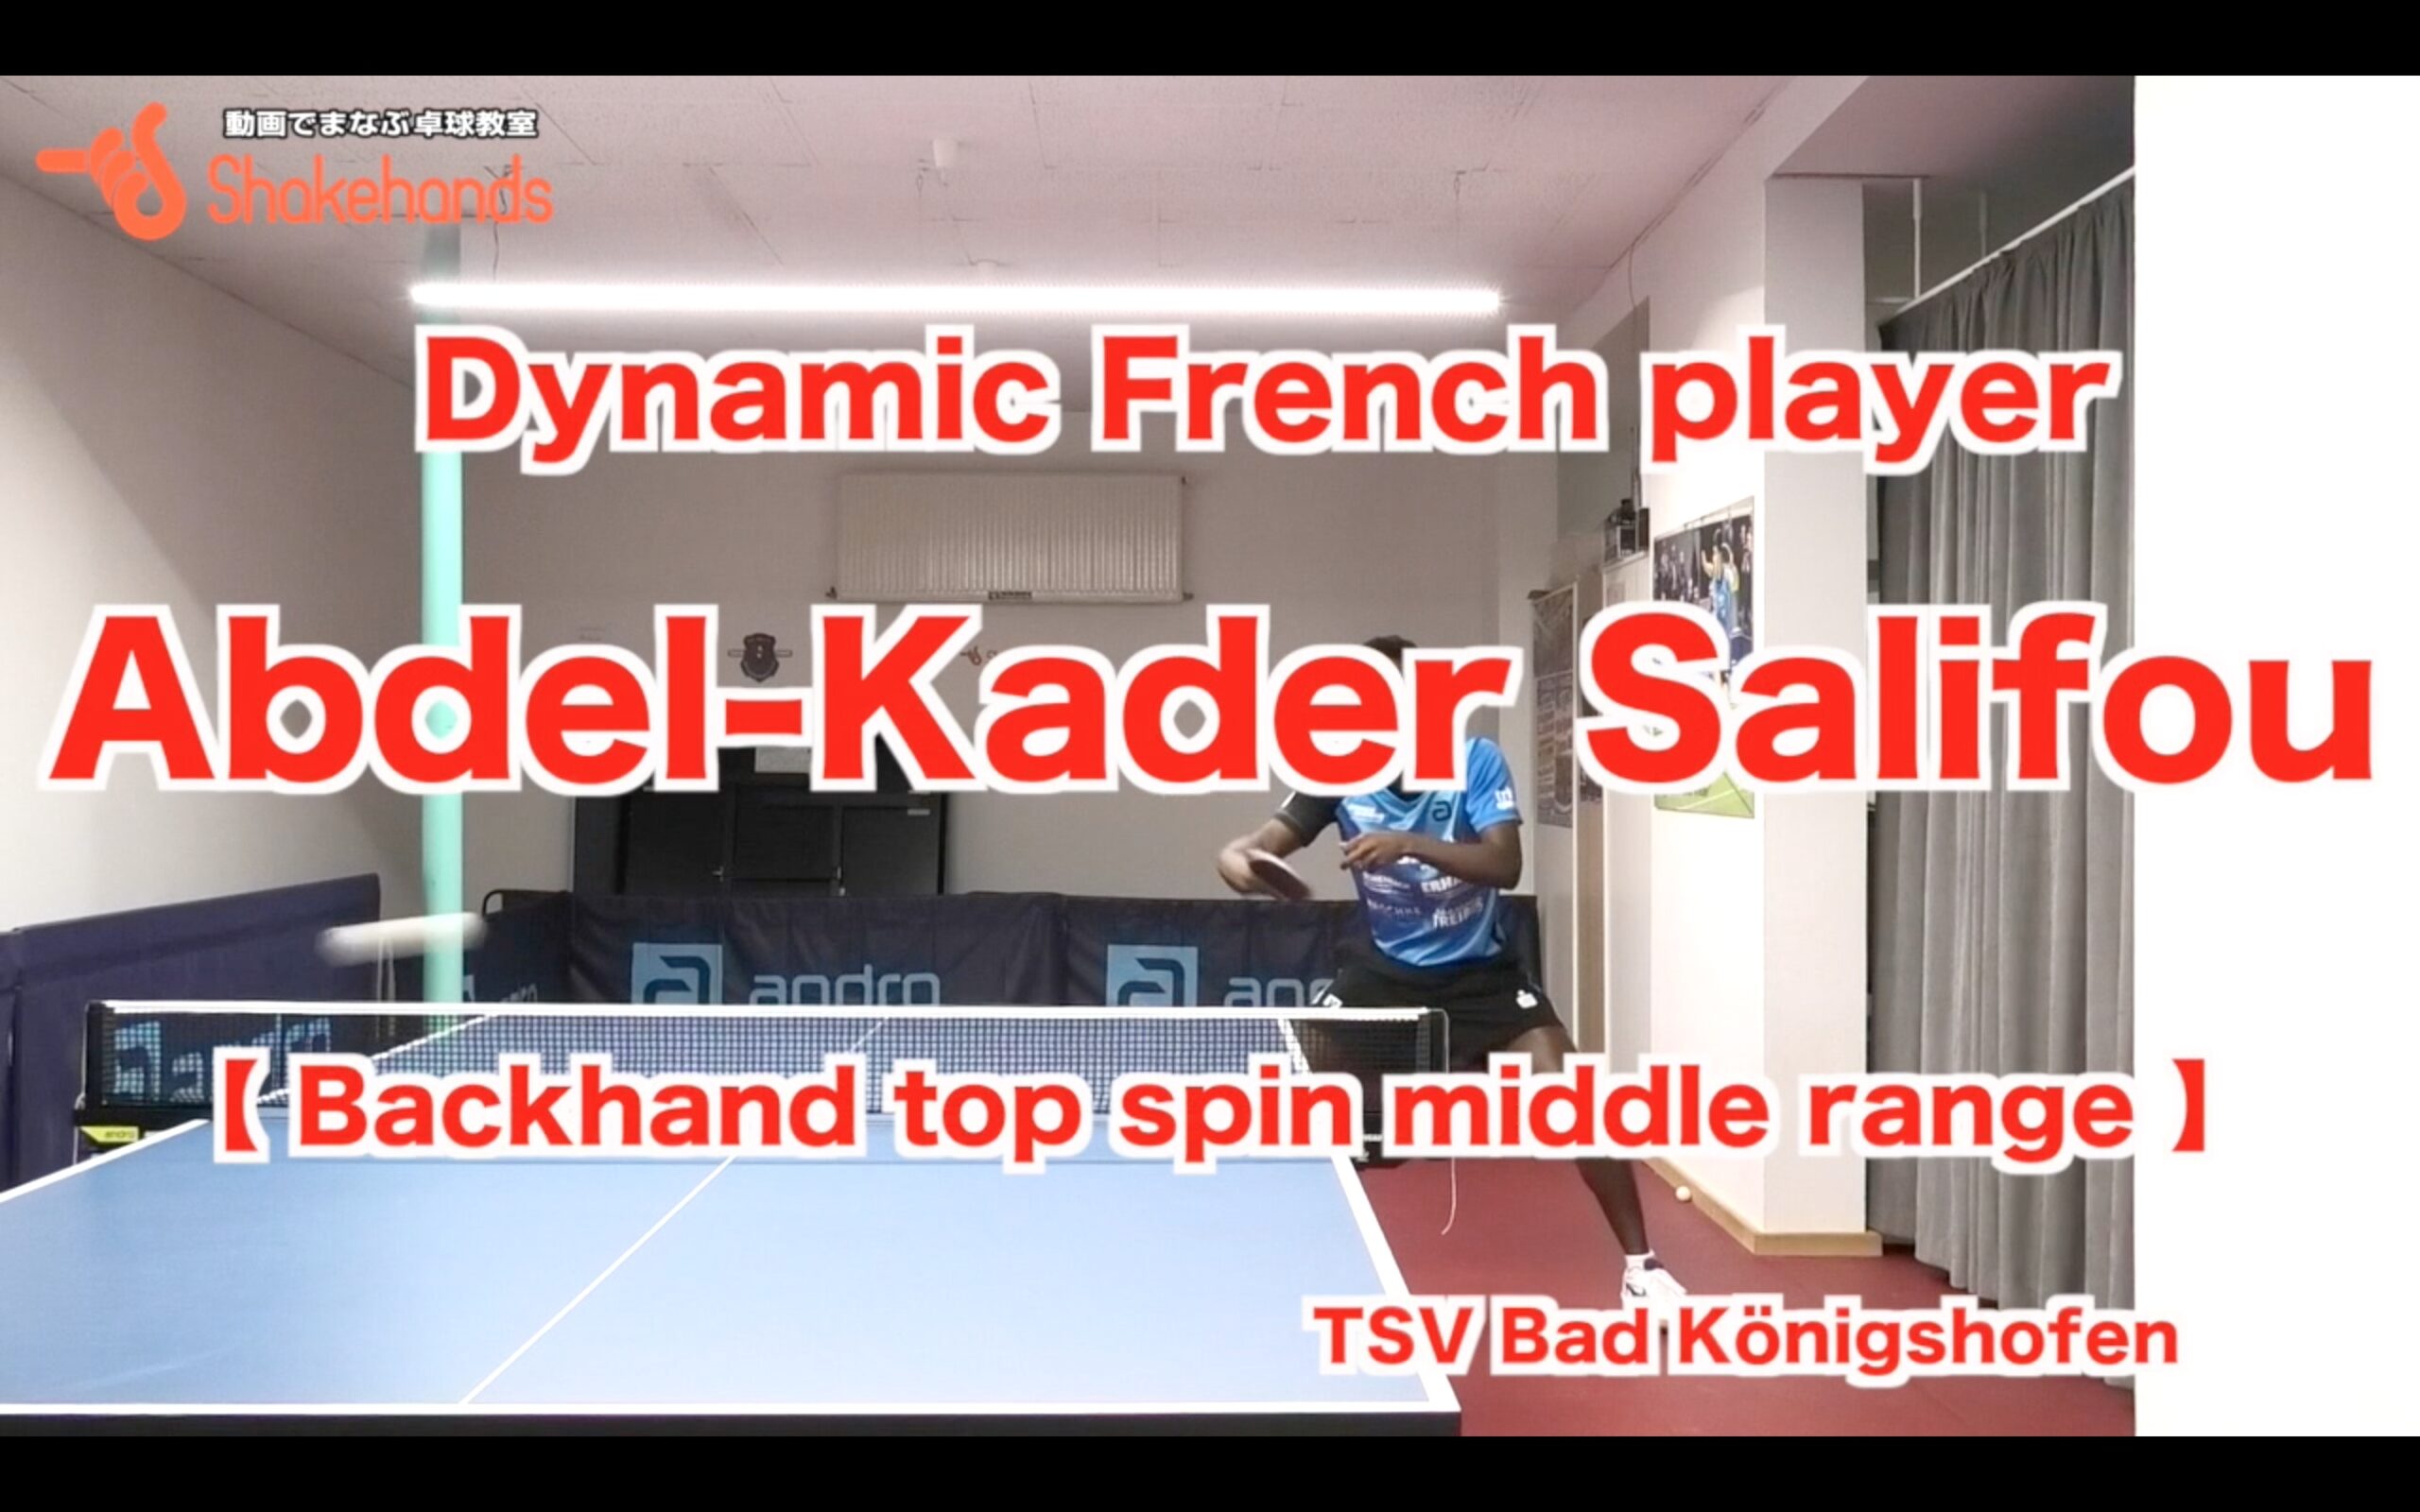 Backhand top spin middle range